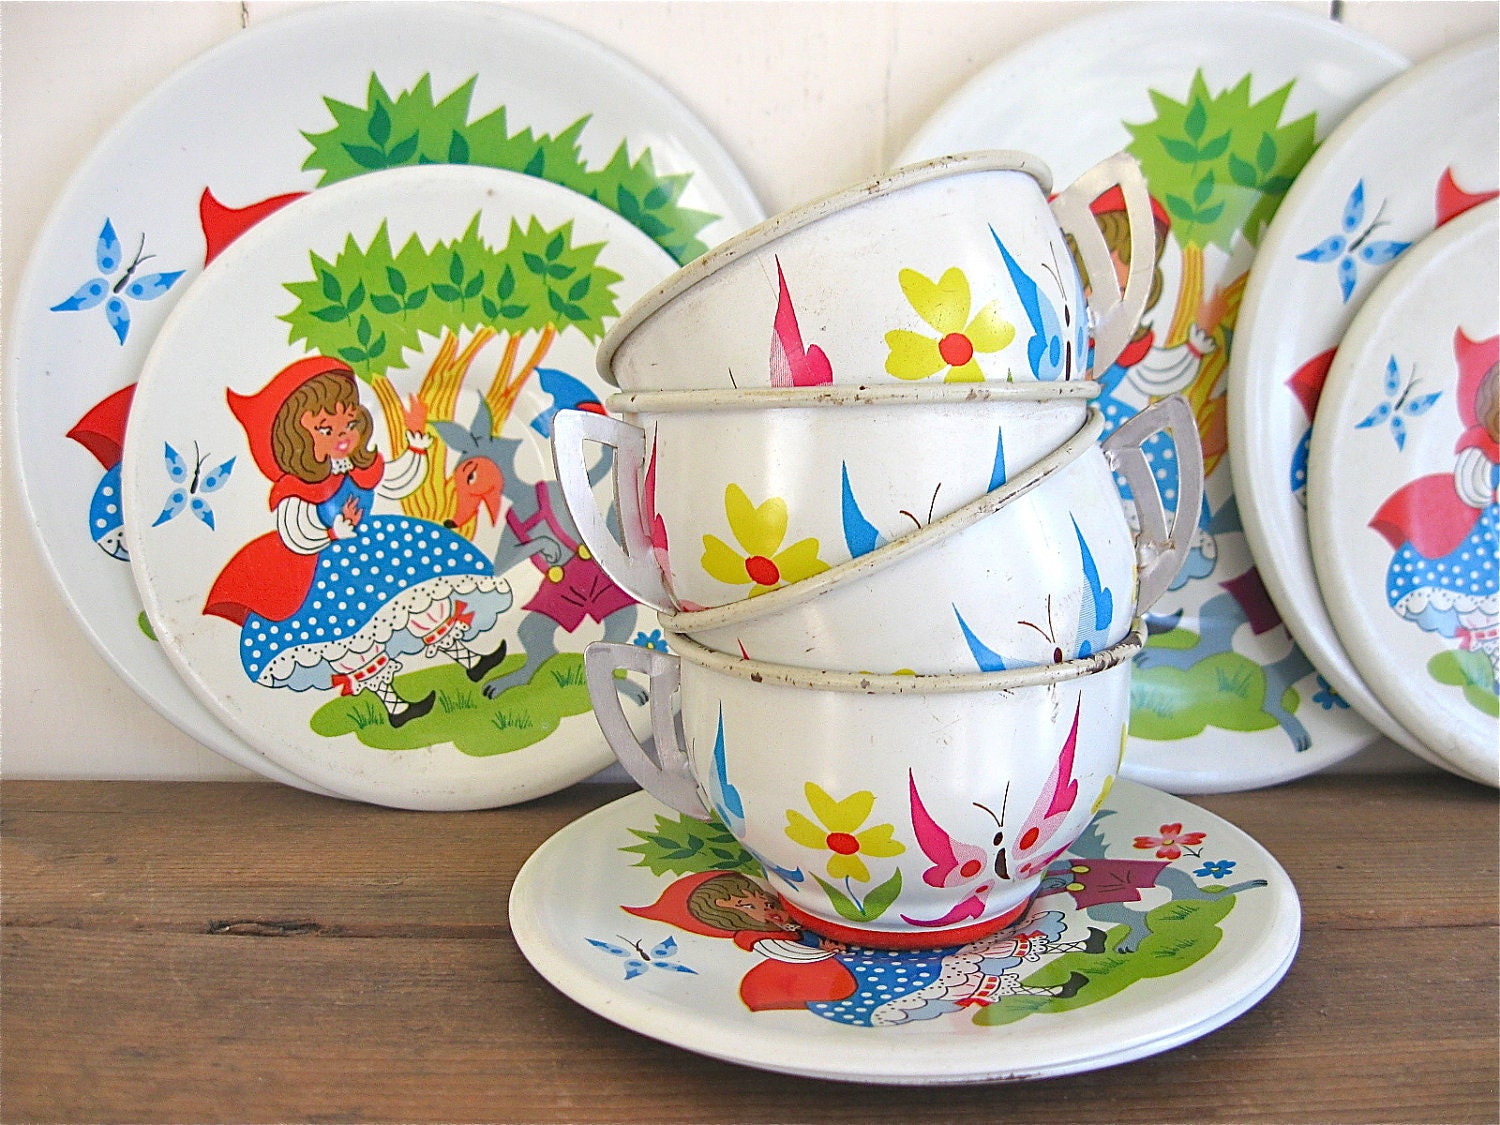 by cups saucers  little cups tin toys saucers plates plates anythinggoeshere vintage and vintage